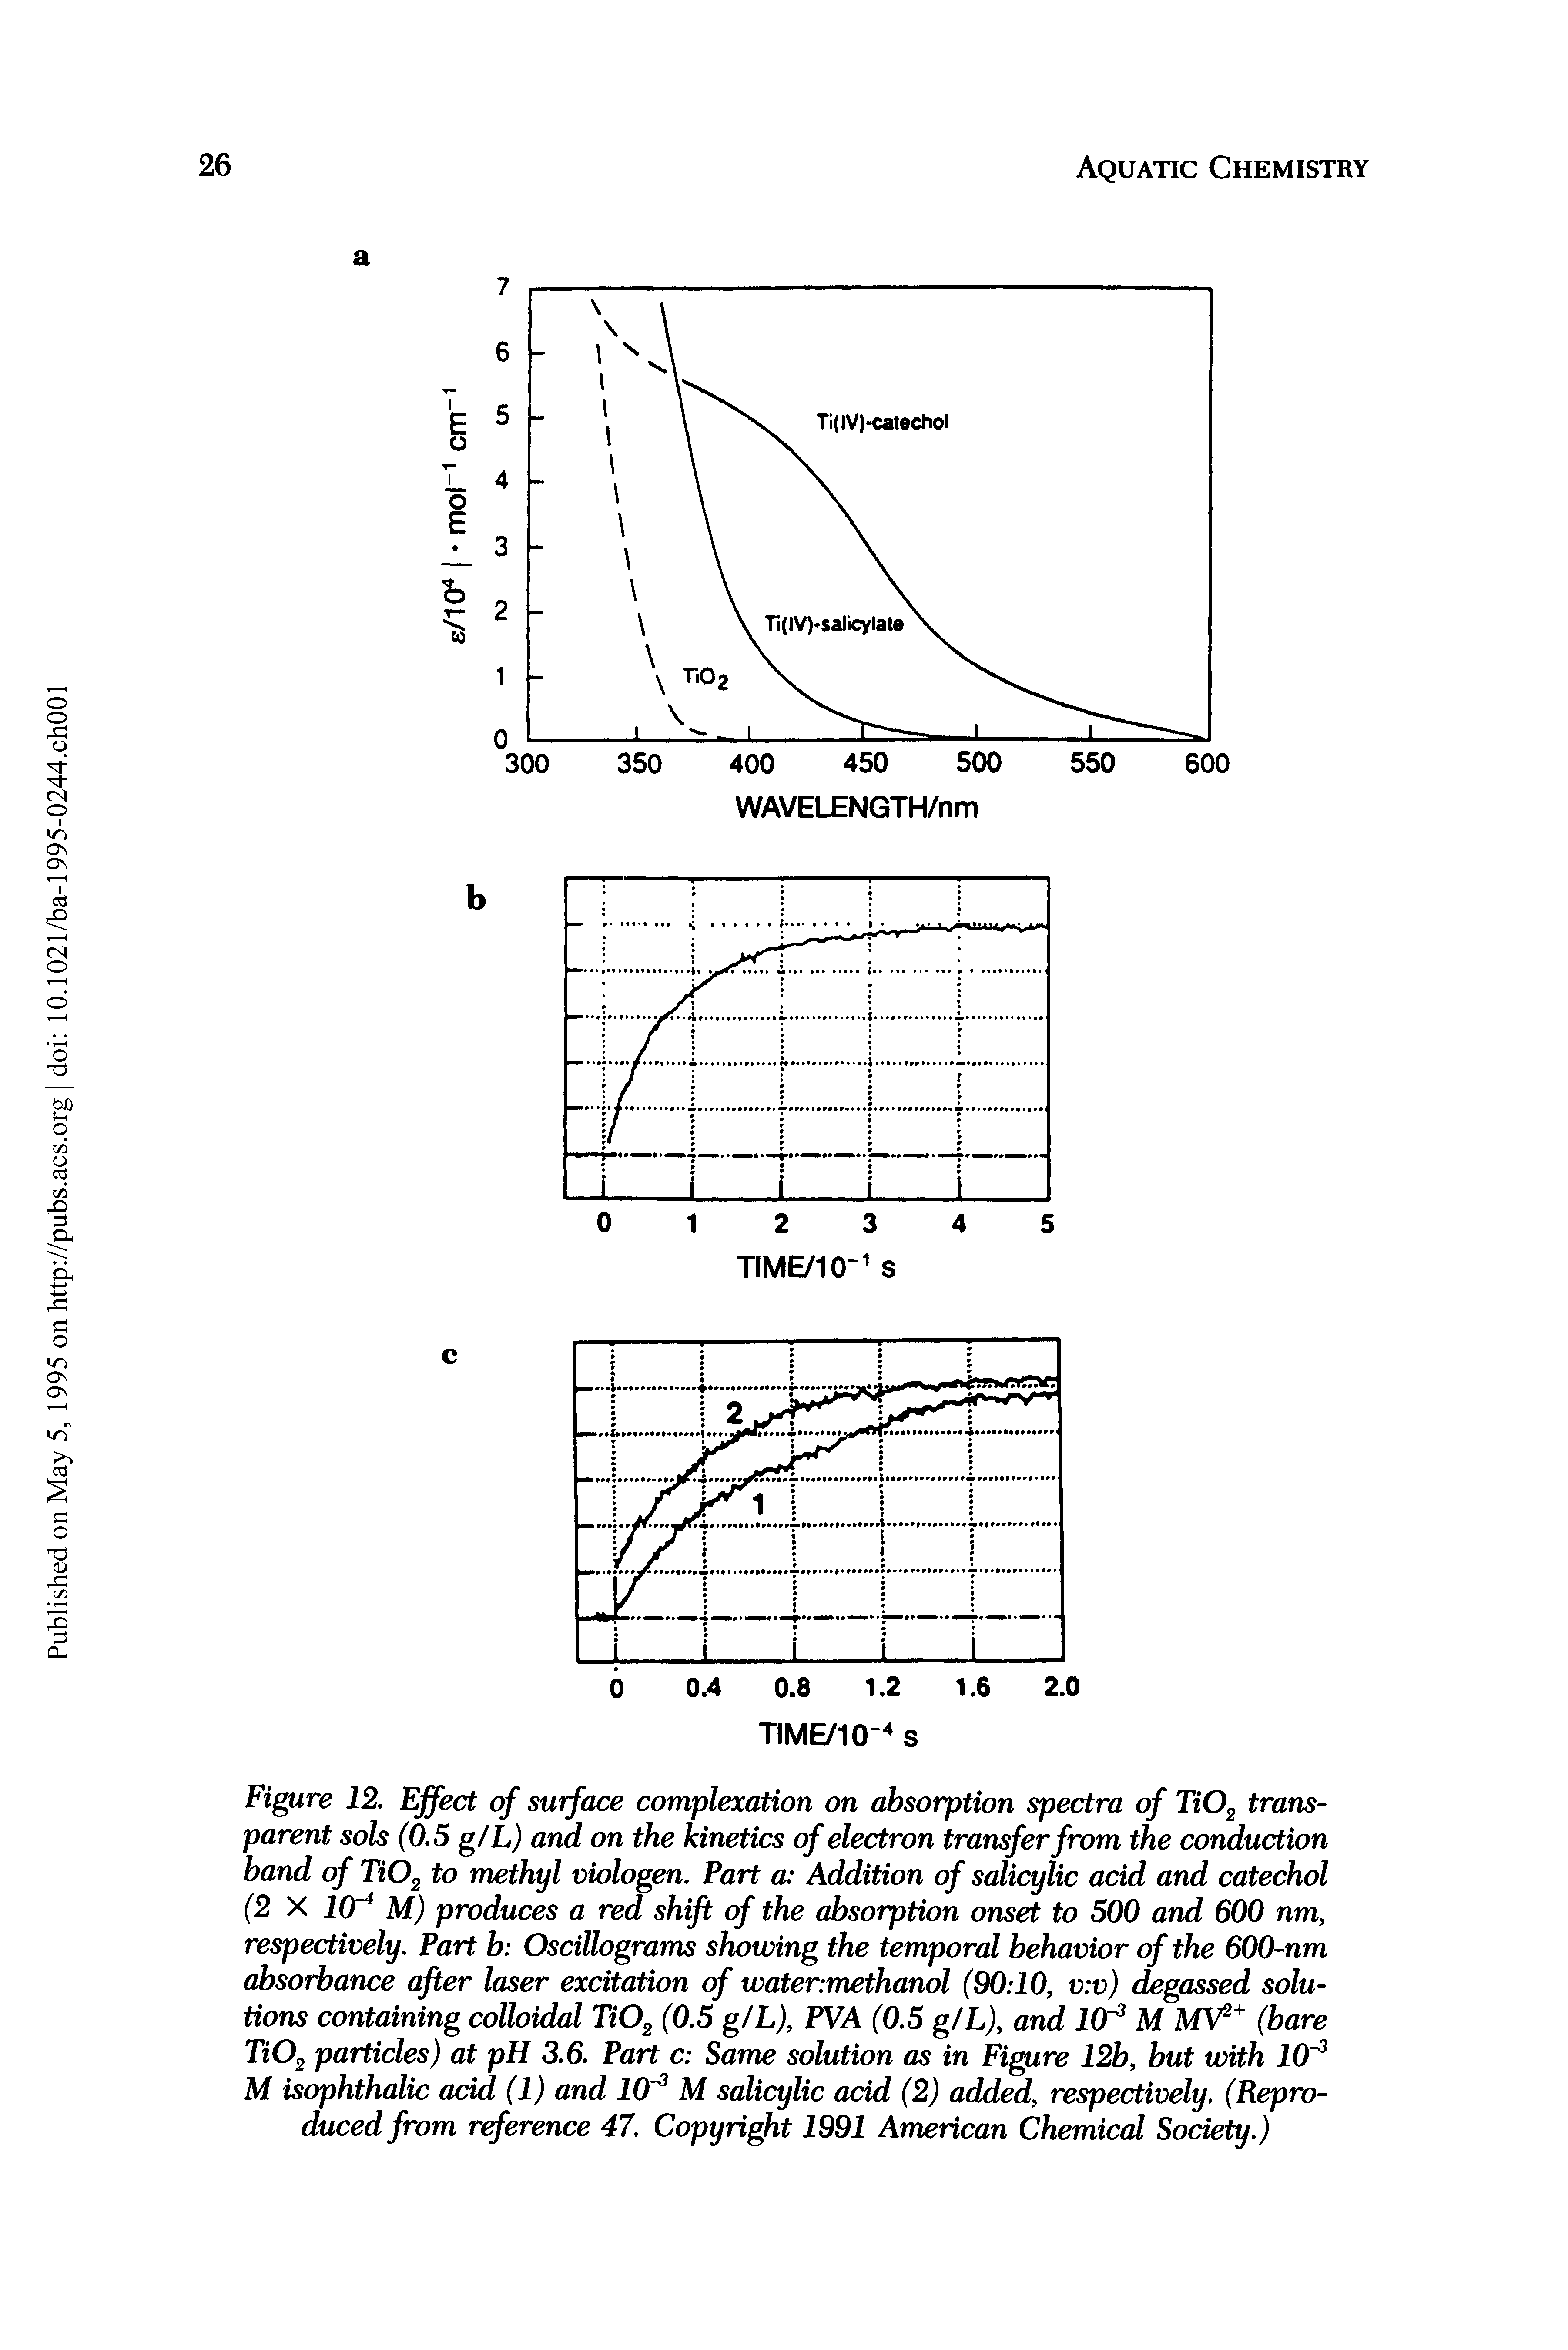 Figure 12. Effect of surface complexation on absorption spectra of TiOz transparent sols (0.5 g/L) and on the kinetics of electron transfer from the conduction hand of TiOz to methyl viologen. Part a Addition of salicylic acid and catechol (2 X 10 M) produces a red shift of the absorption onset to 500 and 600 nm, respectively. Part b Oscillograms showing the temporal behavior of the 600-nm absorbance after laser excitation of water methanol (90 10, v v) degassed solutions containing colloidal TiOz (0.5 g/L), PVA (0.5 g/L), and 10 M MV2+ (bare Ti02 particles) at pH 3.6. Part c Same solution as in Figure 12b, but with 10 M isophthalic acid (1) and 10 3 M salicylic acid (2) added, respectively. (Reproduced from reference 47. Copyright 1991 American Chemical Society.)...